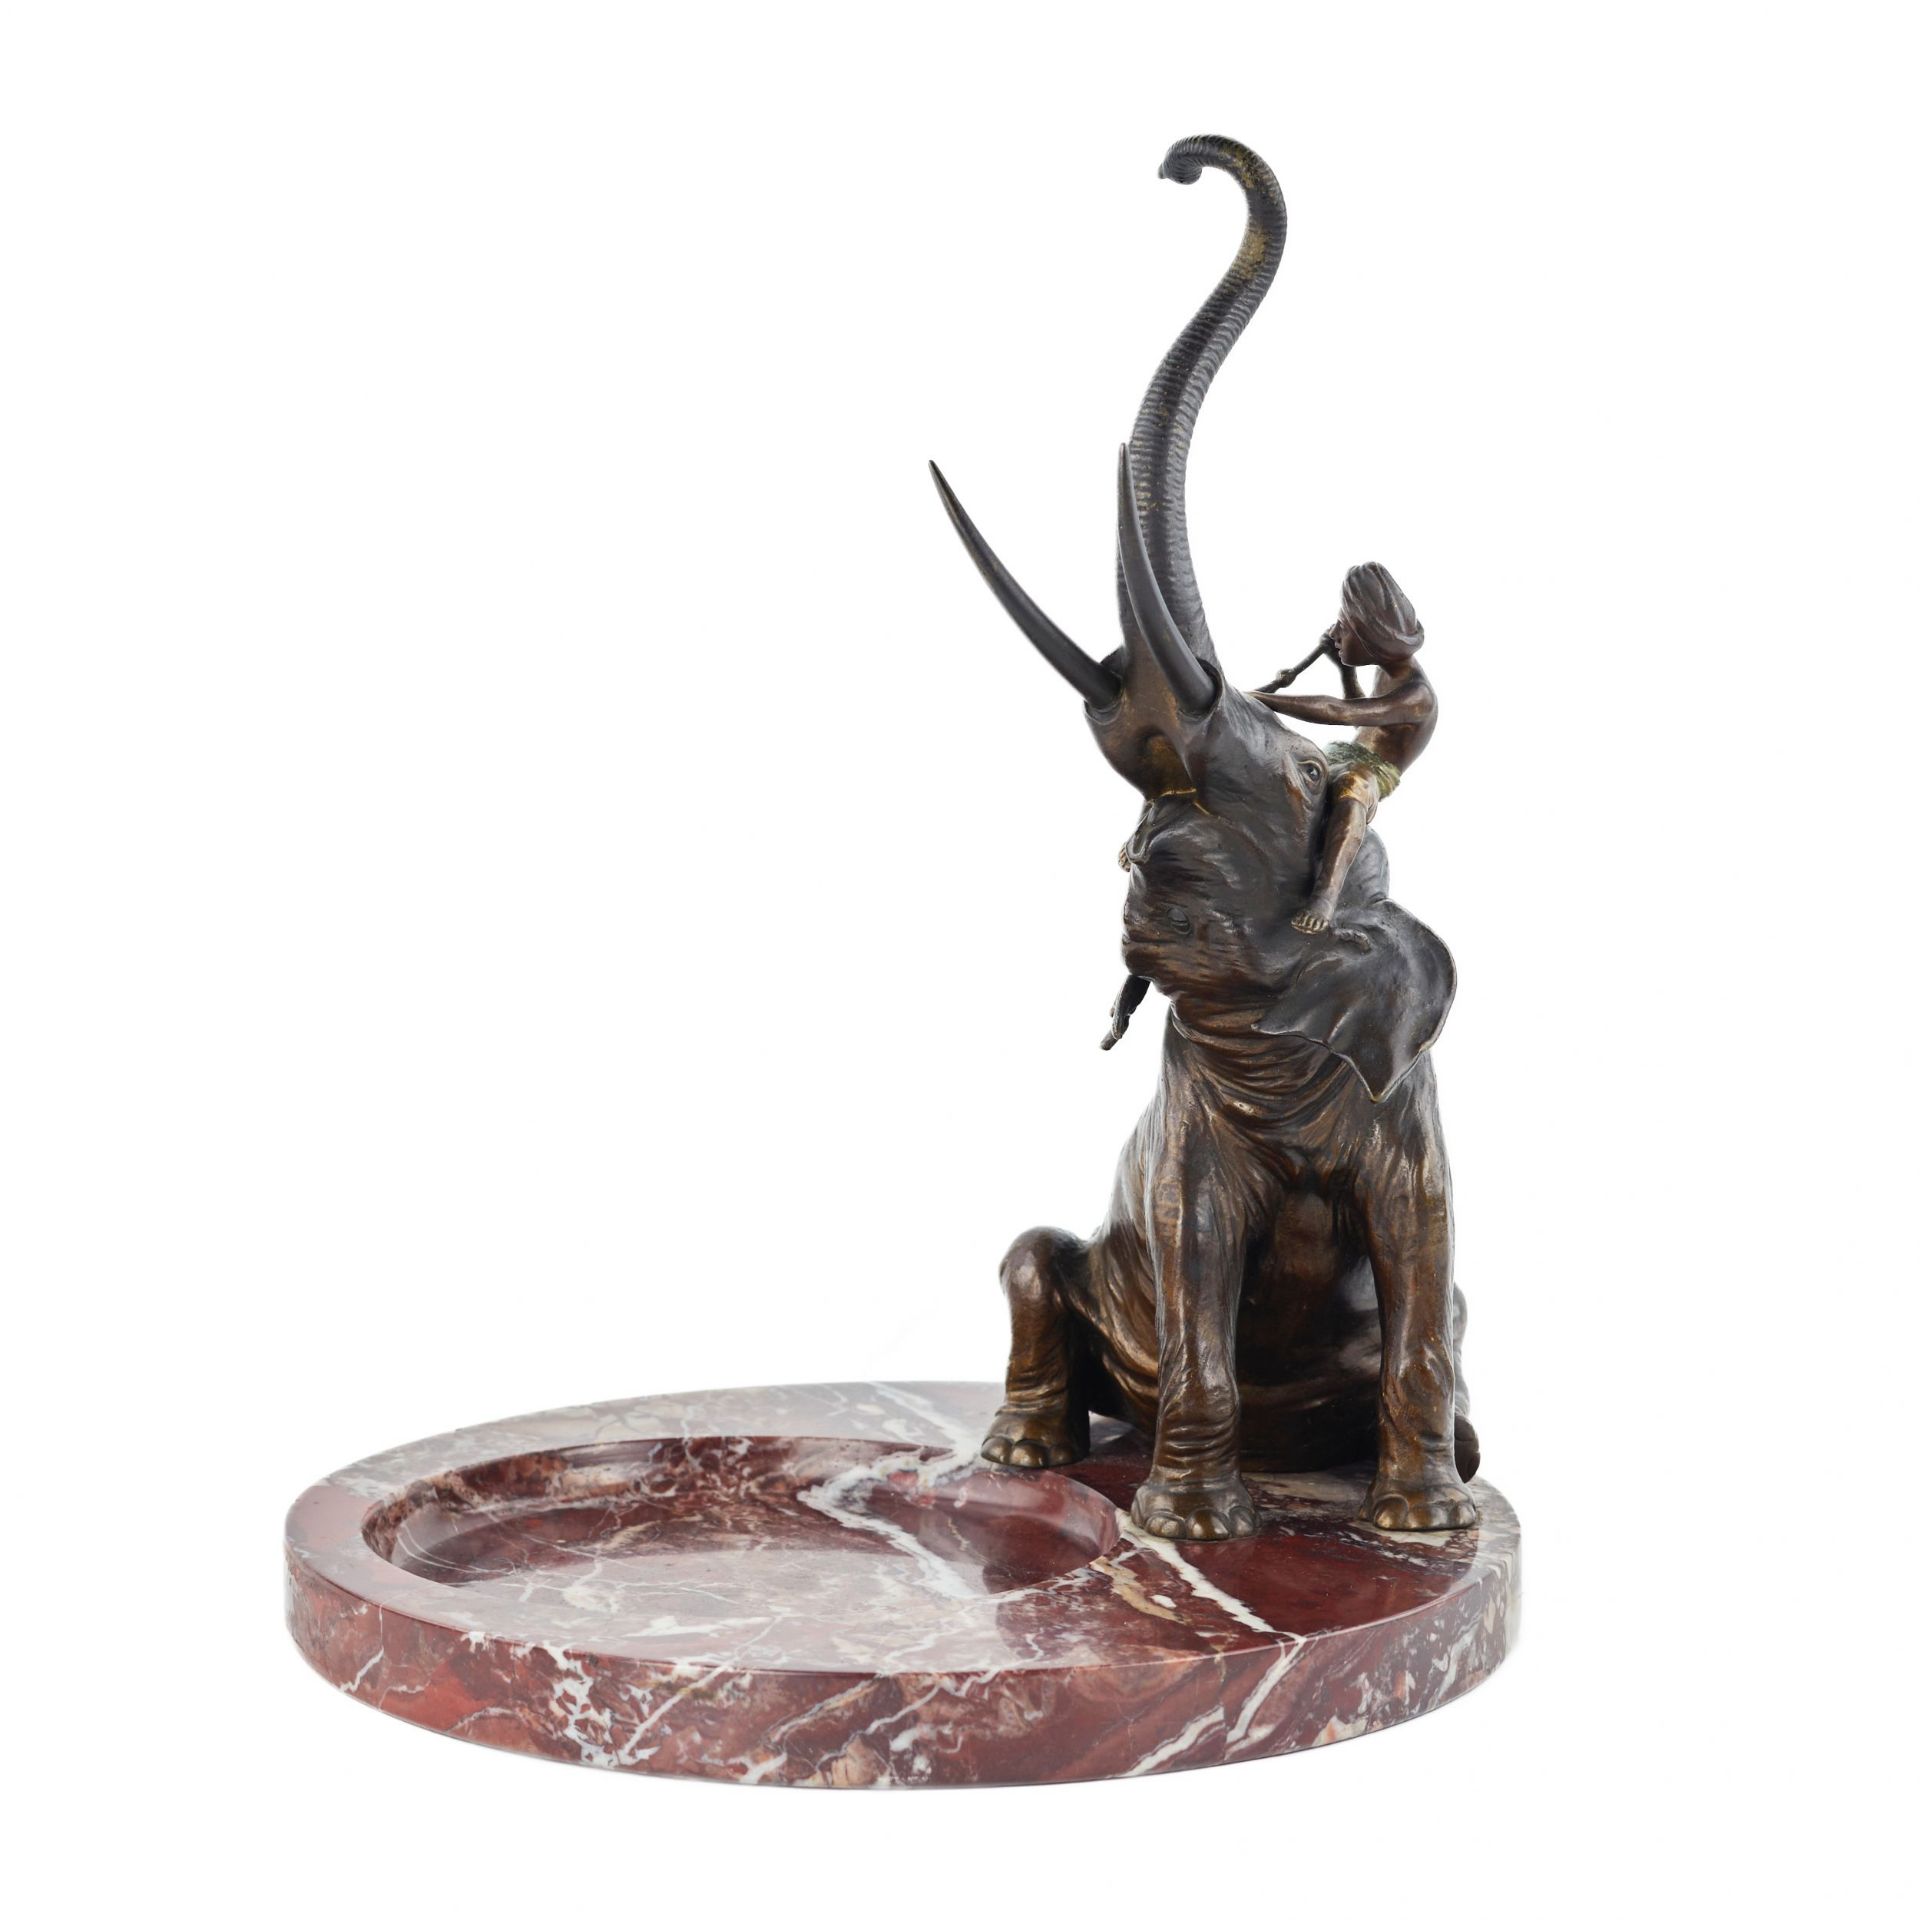 Franz Bergman. Decorative dish for small items made of marble, with a bronze figure of an elephant. - Image 5 of 5